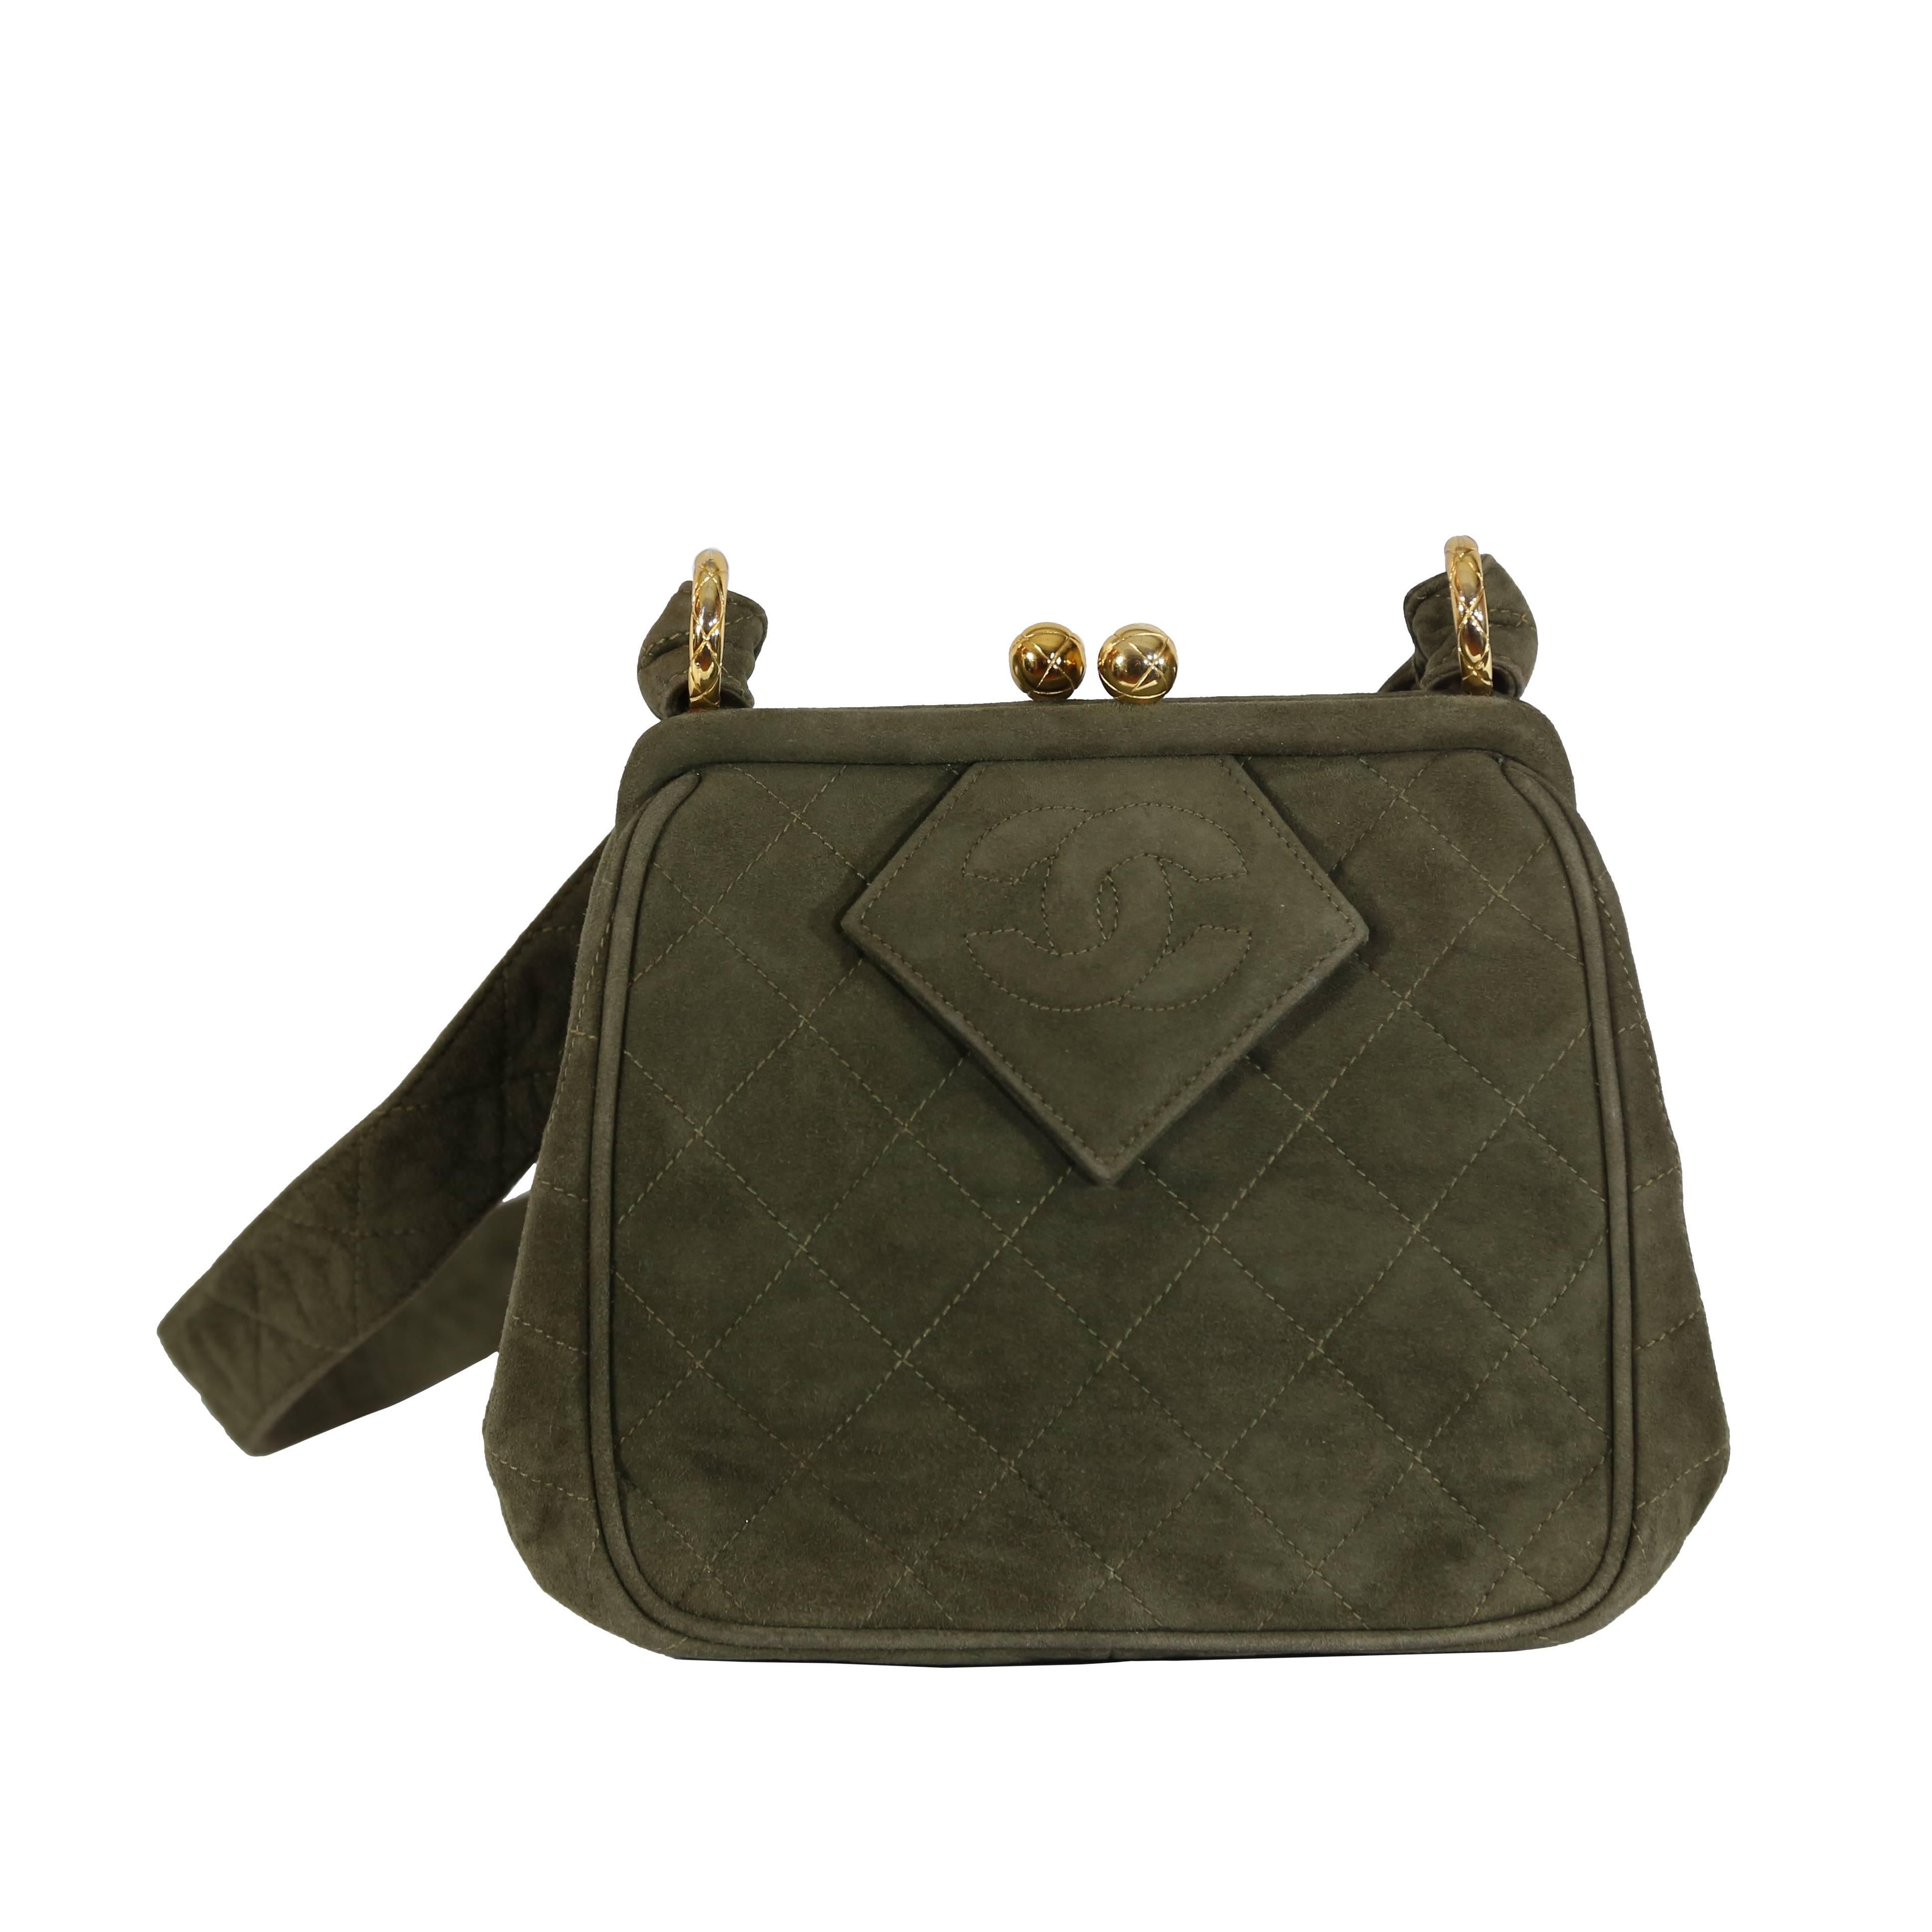 Chanel Olive Green Suede Bag with Gold Hardware